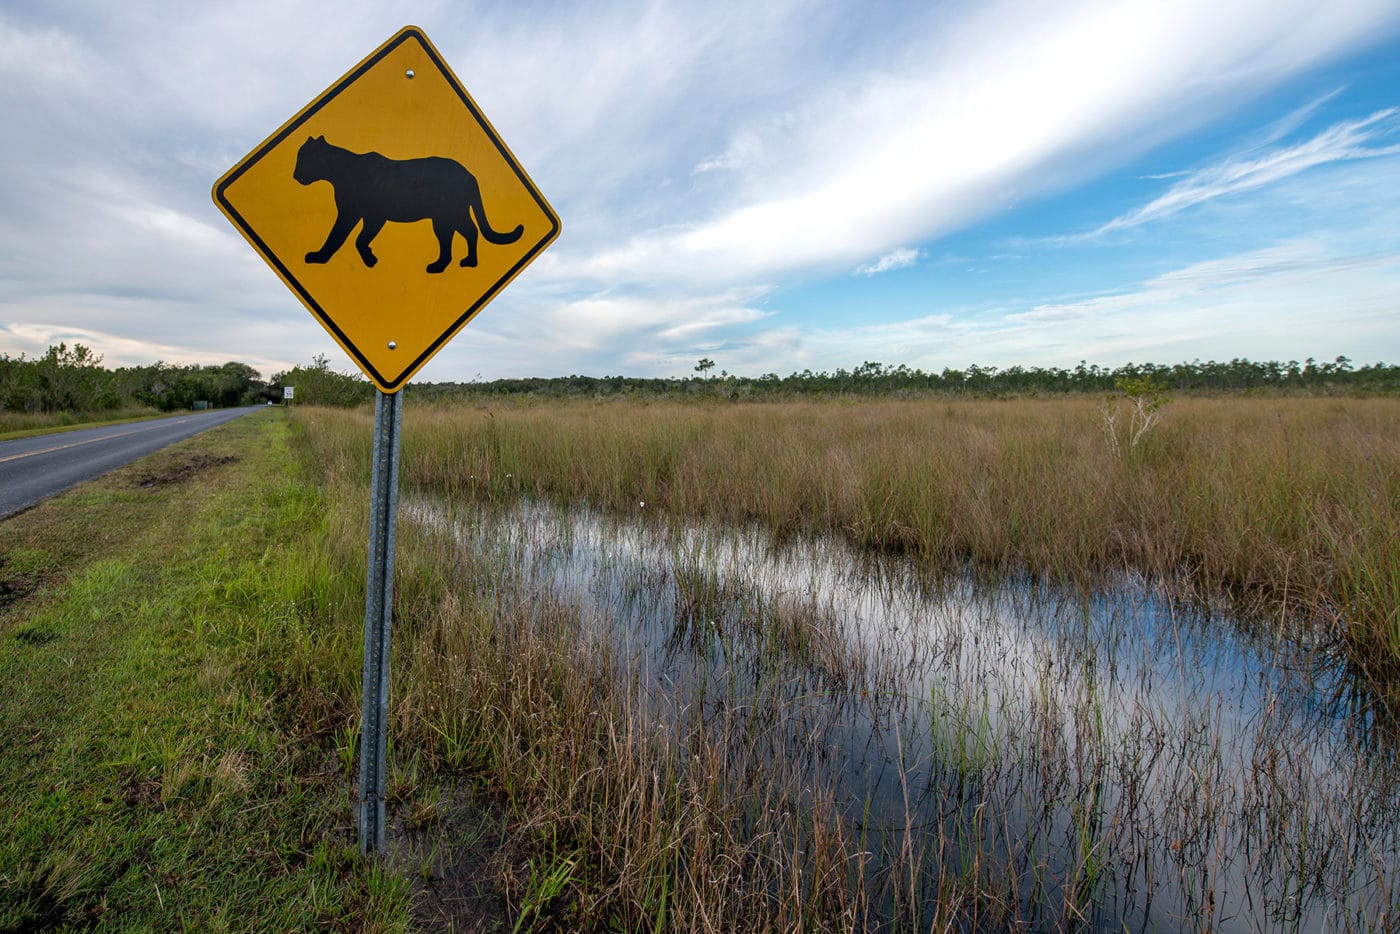 Panther crossing street sign on a rural road